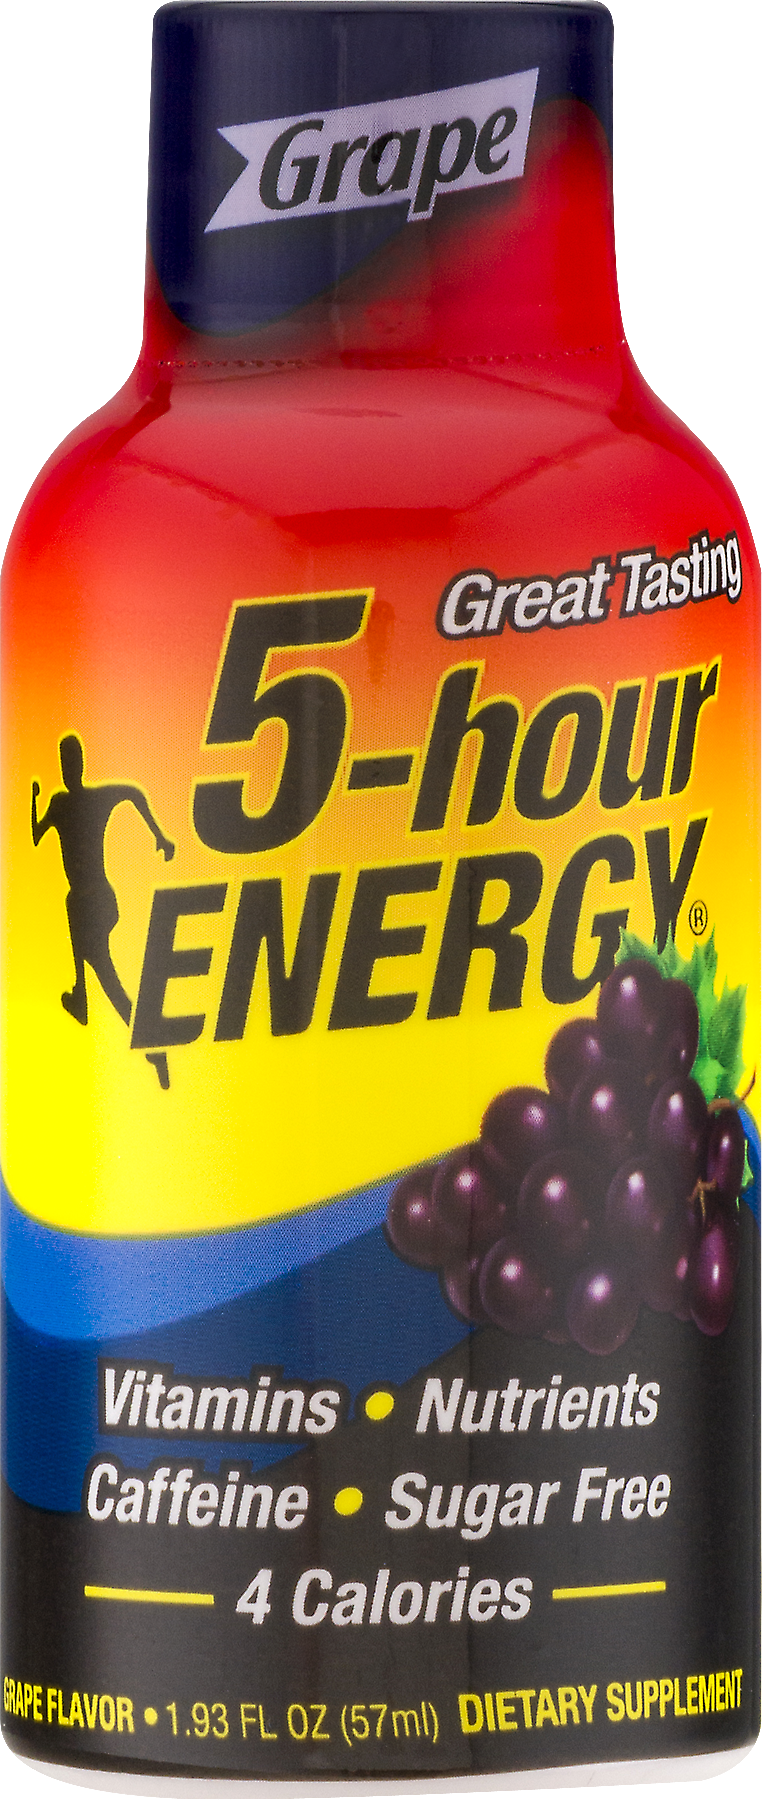 5-hour Energy Grape, Single Bottle - 5 Hour Energy (762x1800), Png Download